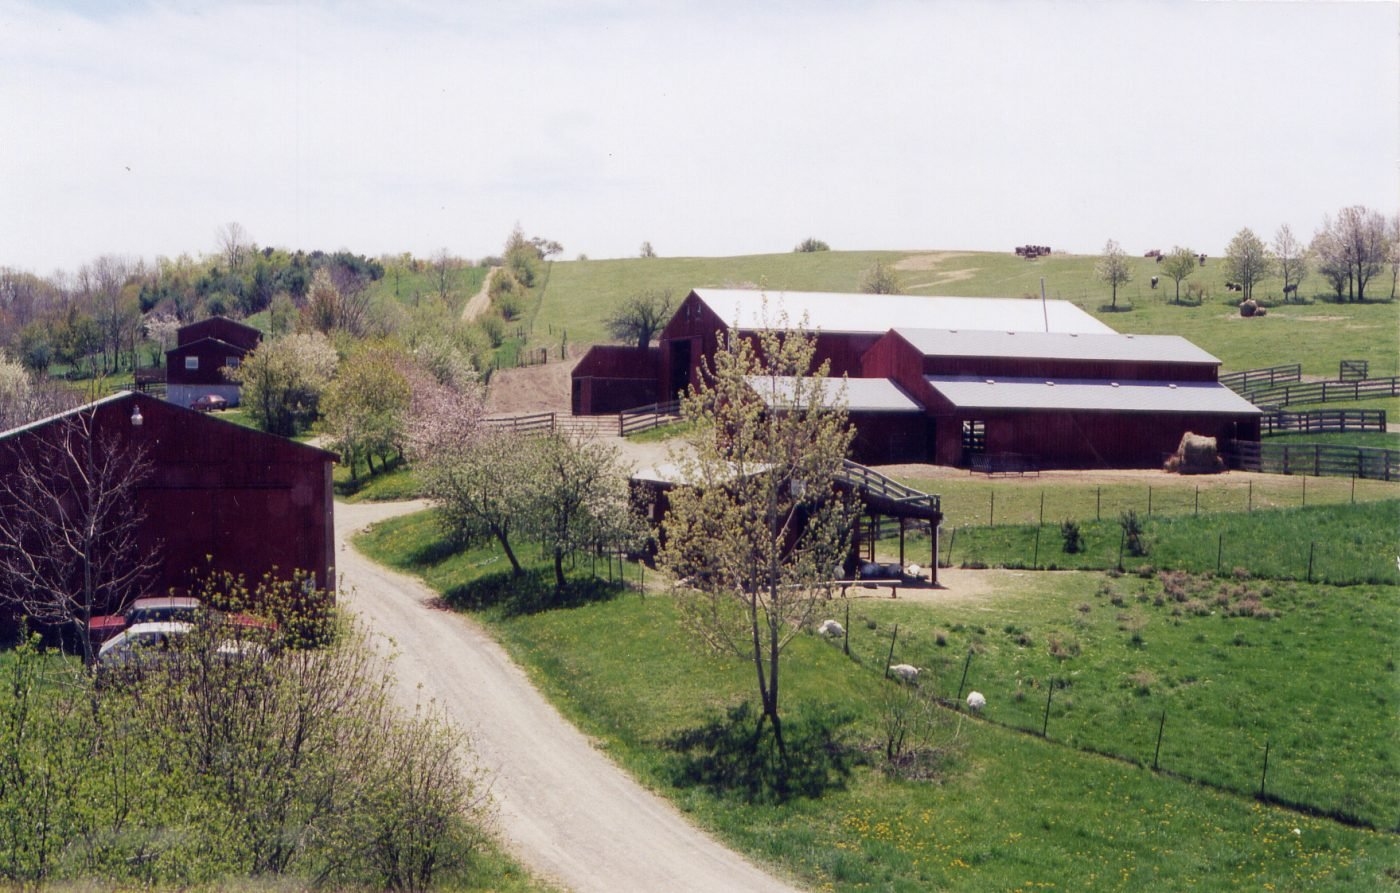 Historic photo of Farm Sanctuary from the early days